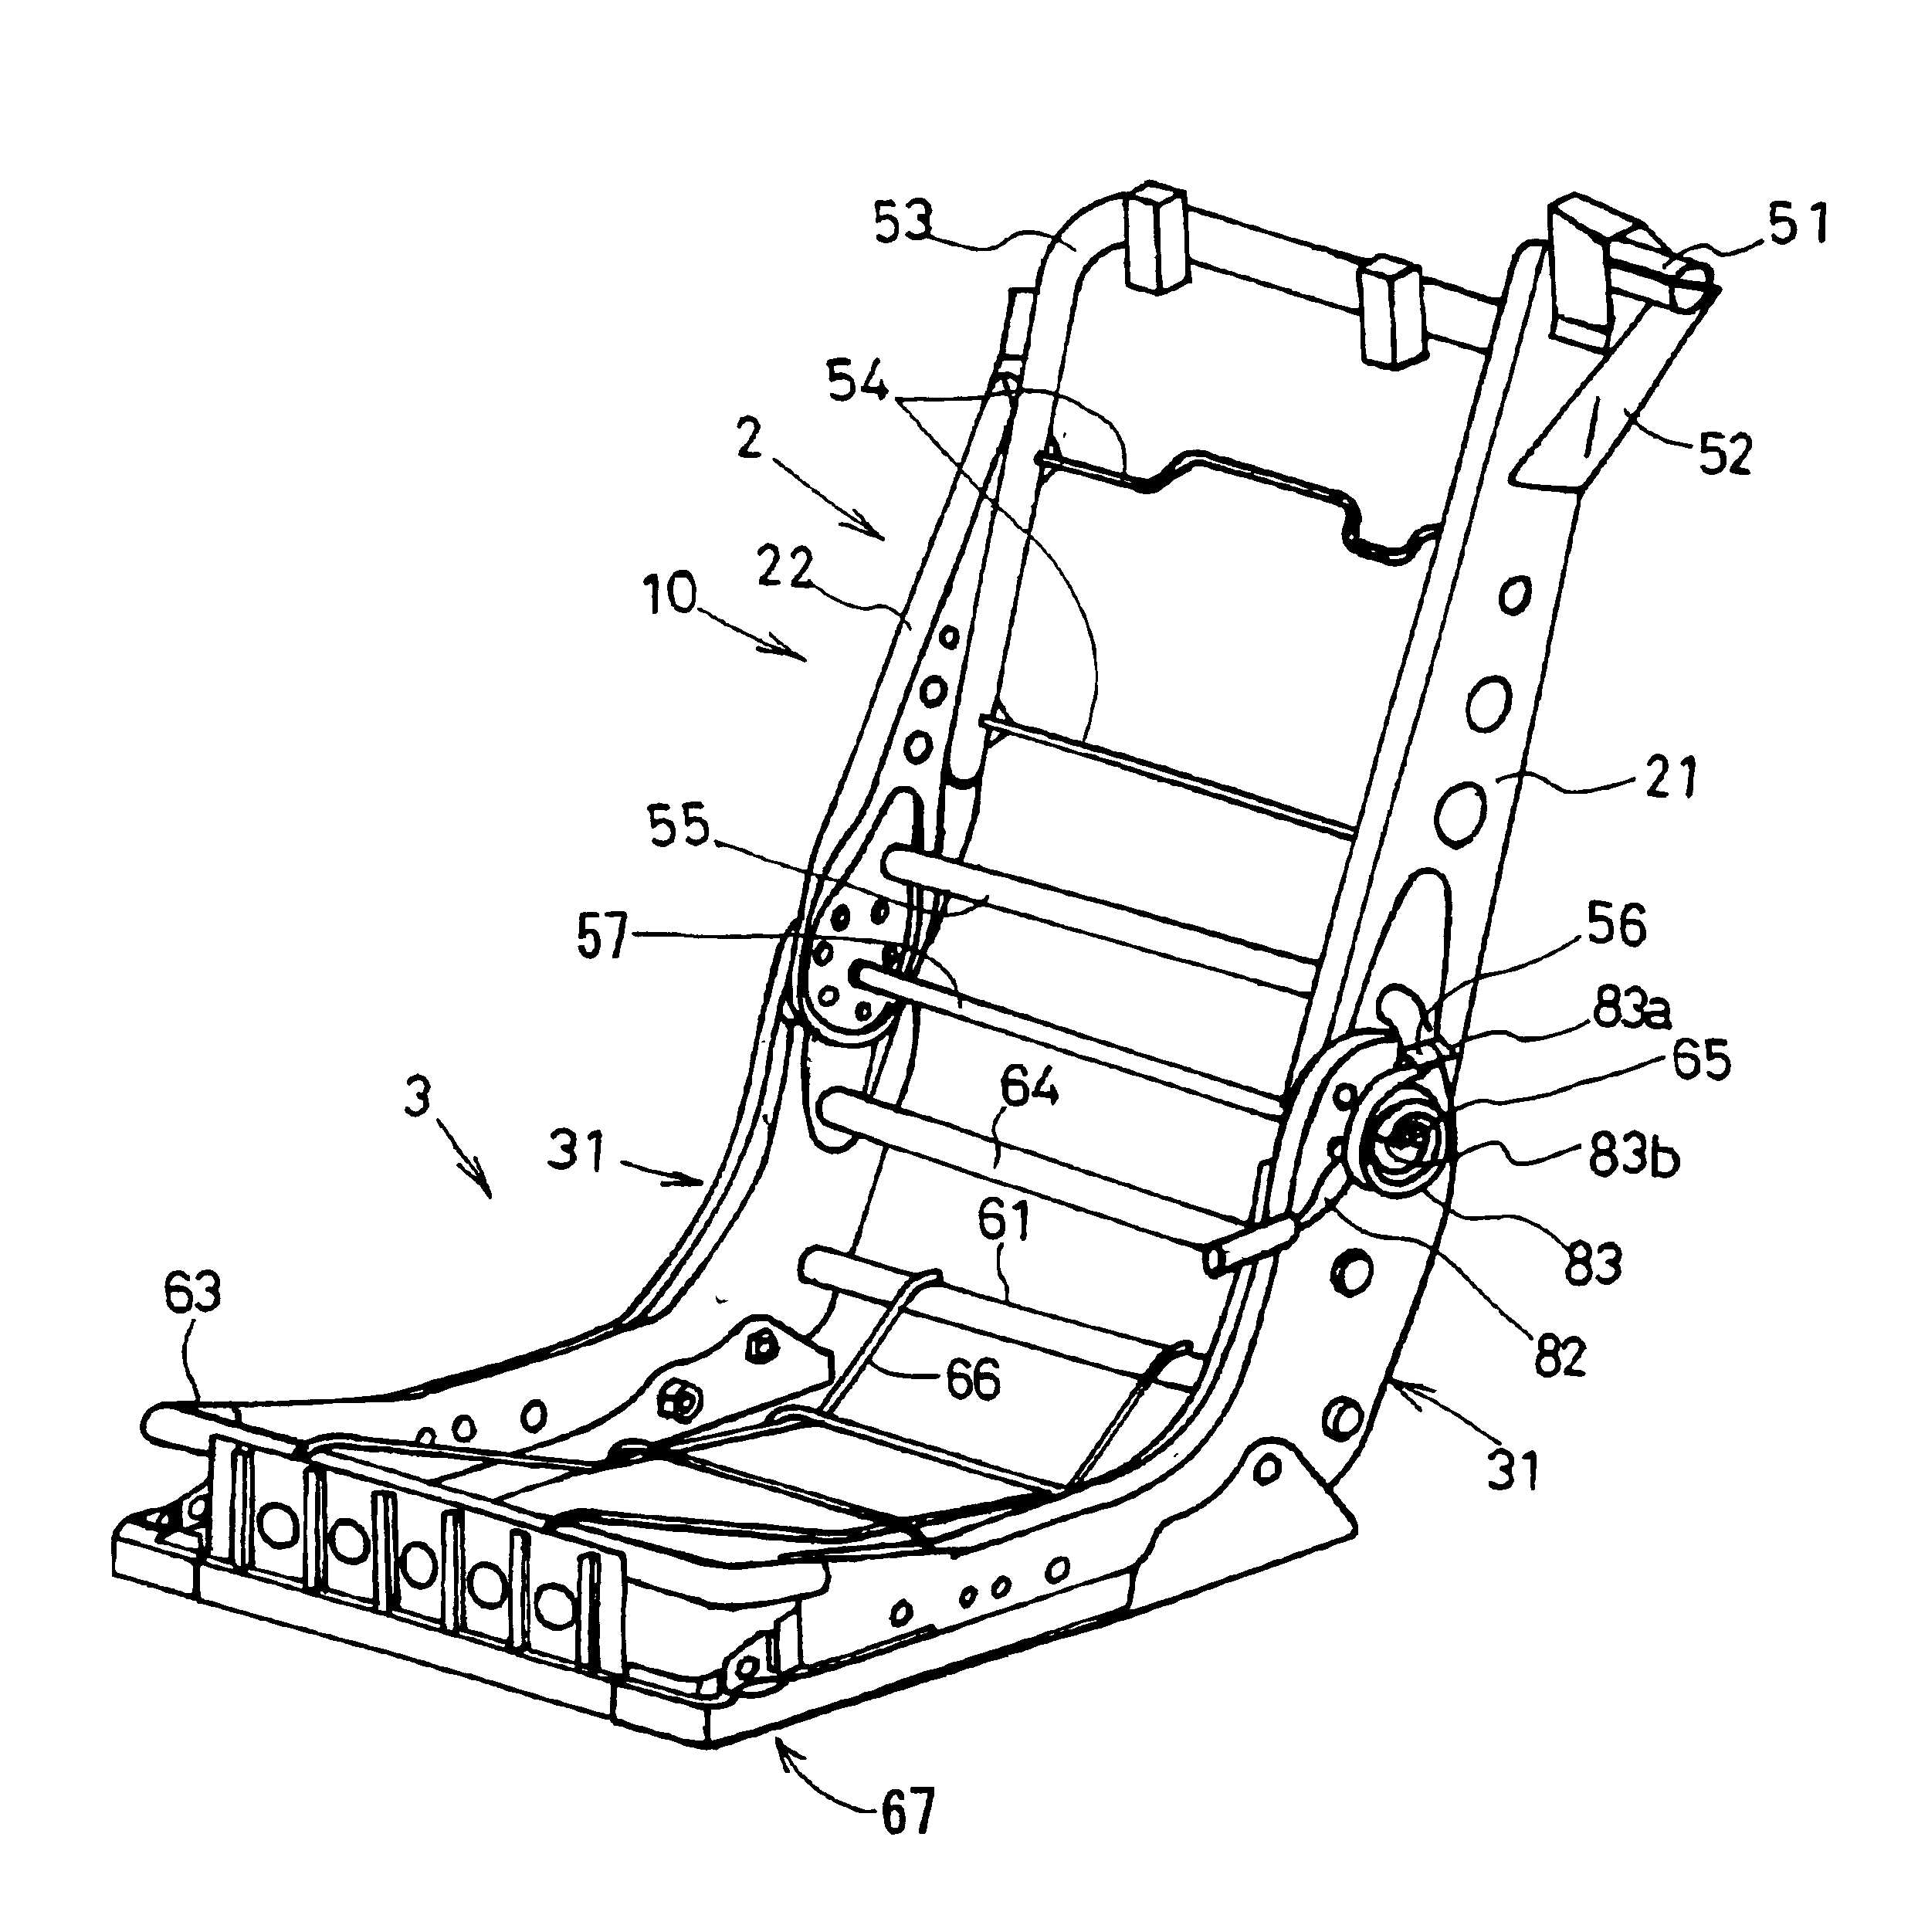 Seat frame of a vehicle seat